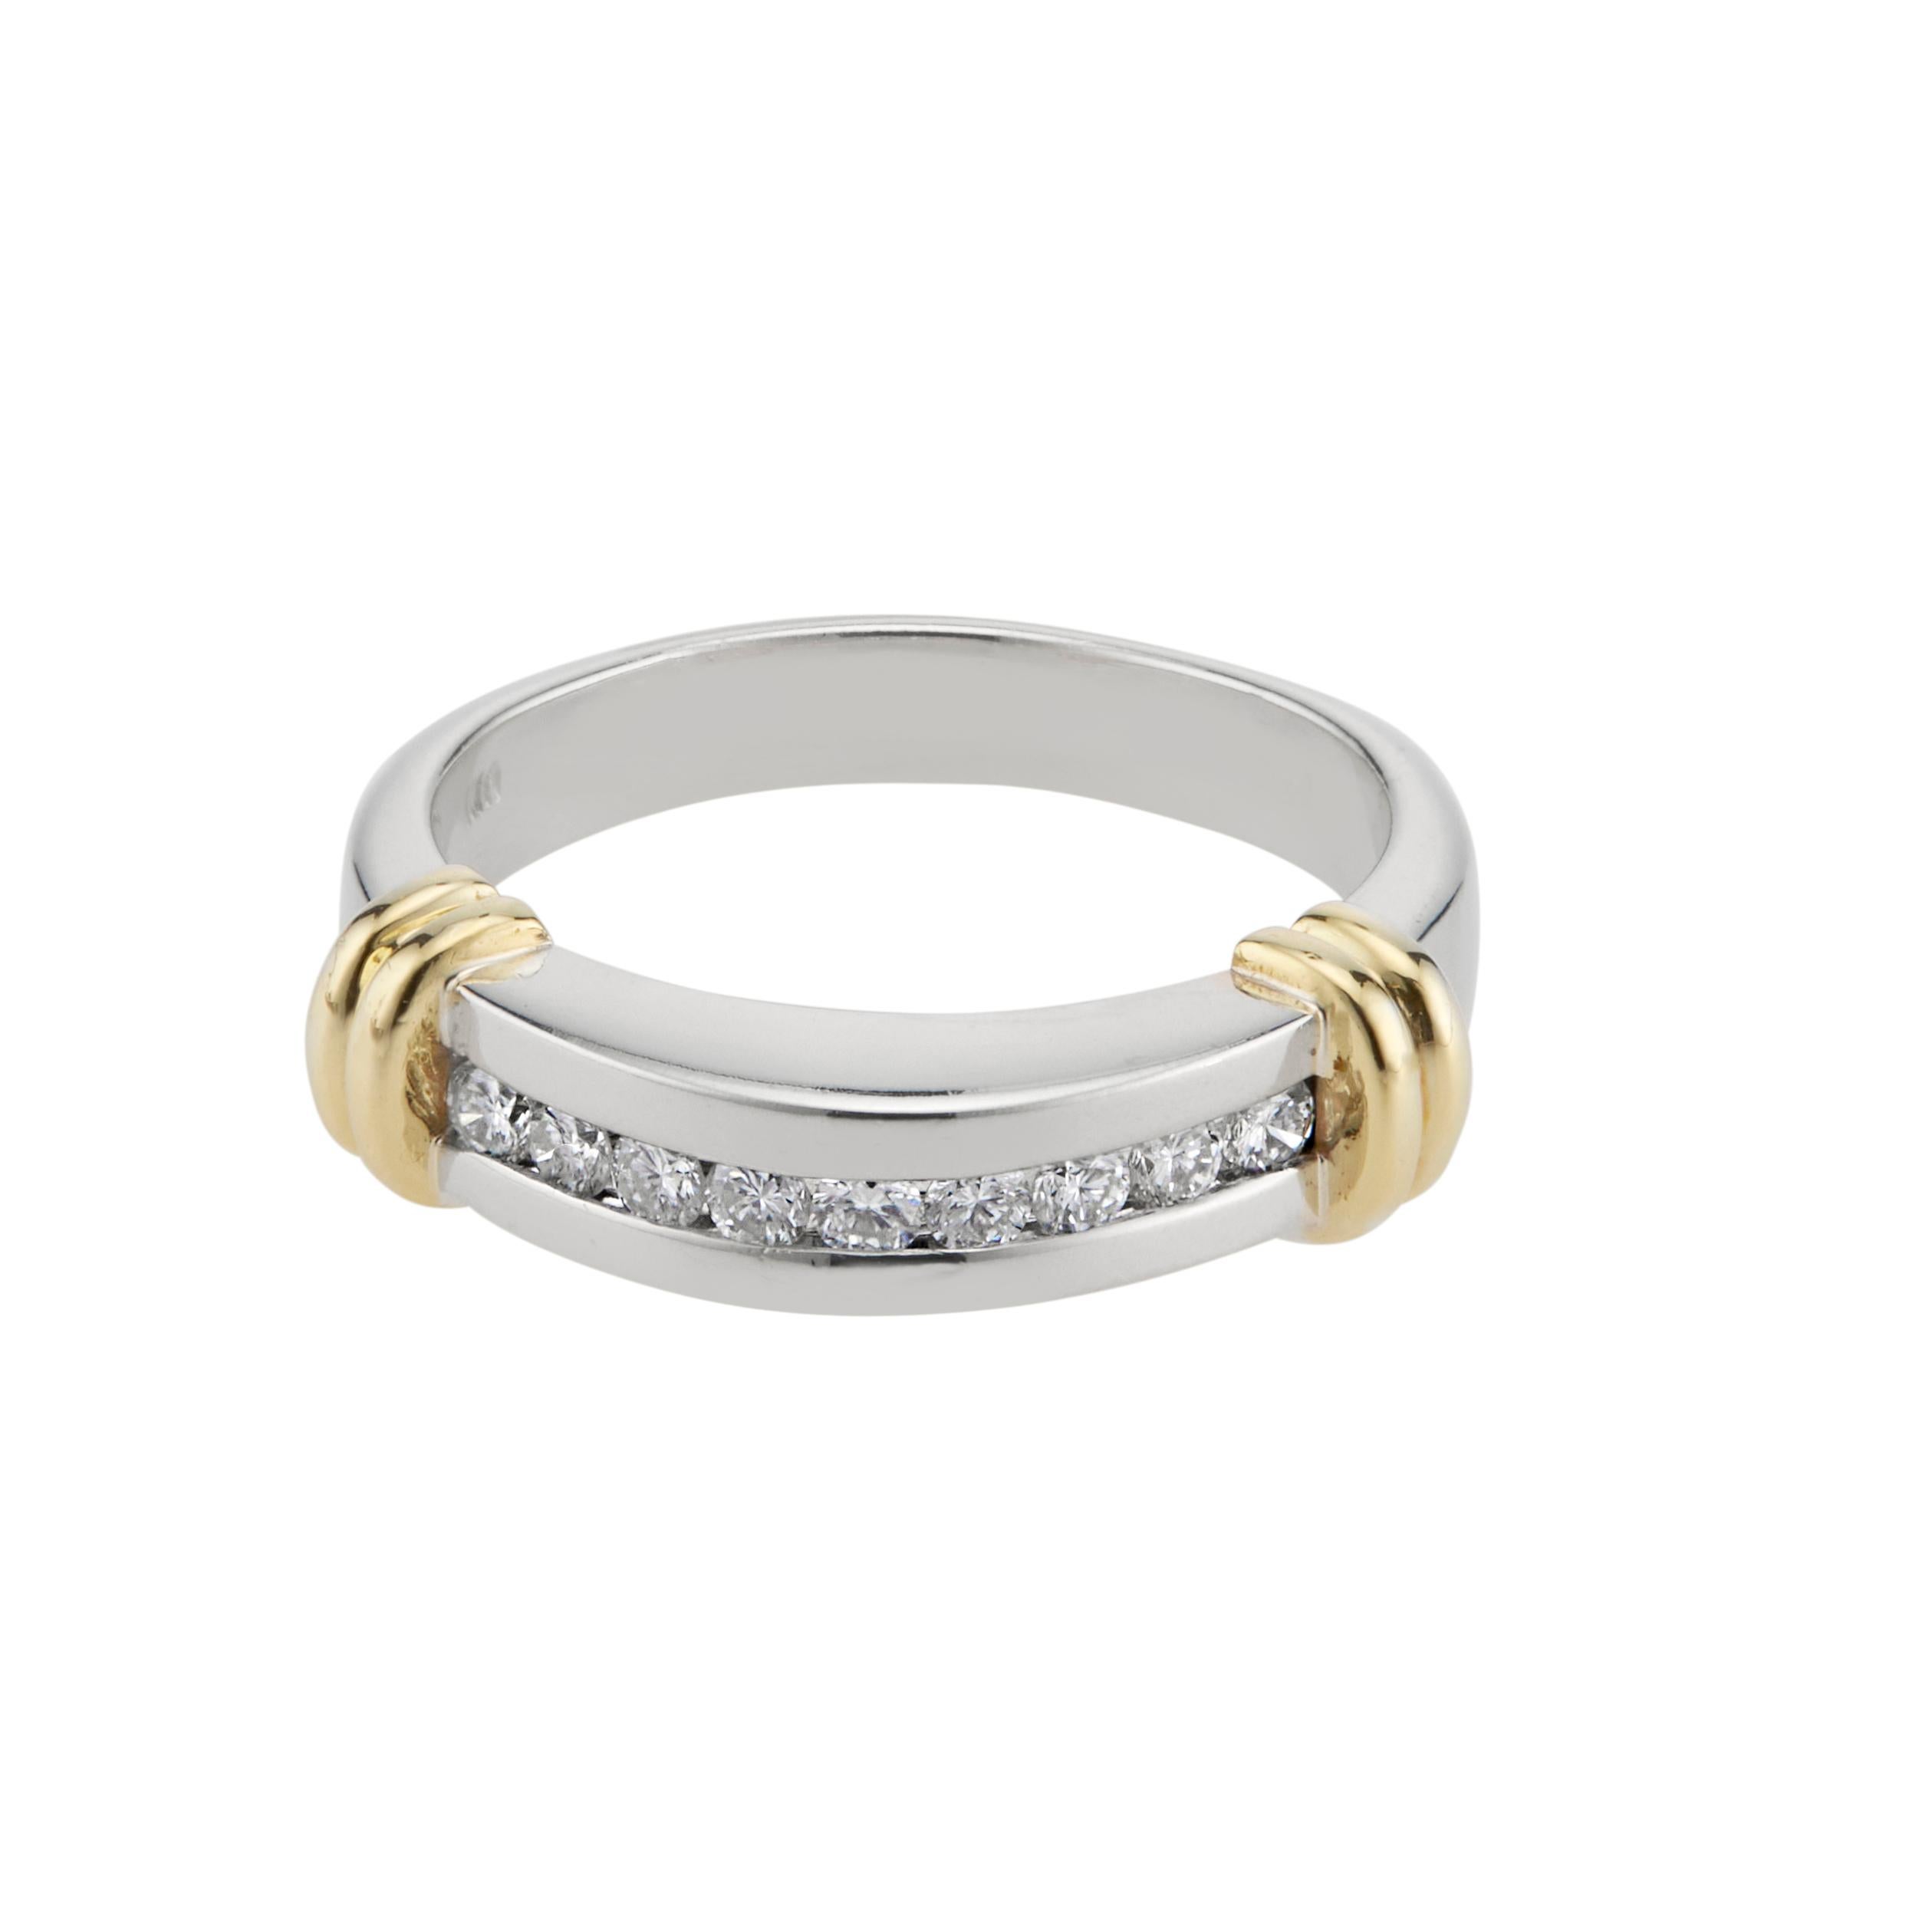 Diamond domed top white gold band ring. Set in 14k white gold with 9 full cut diamonds with 14k yellow gold accents. 

9 full cut diamonds, approx. total weight .27cts, H, SI
Size 7 and sizable
14k white gold
Stamped: 14k
Tested: 14k
Hallmark: